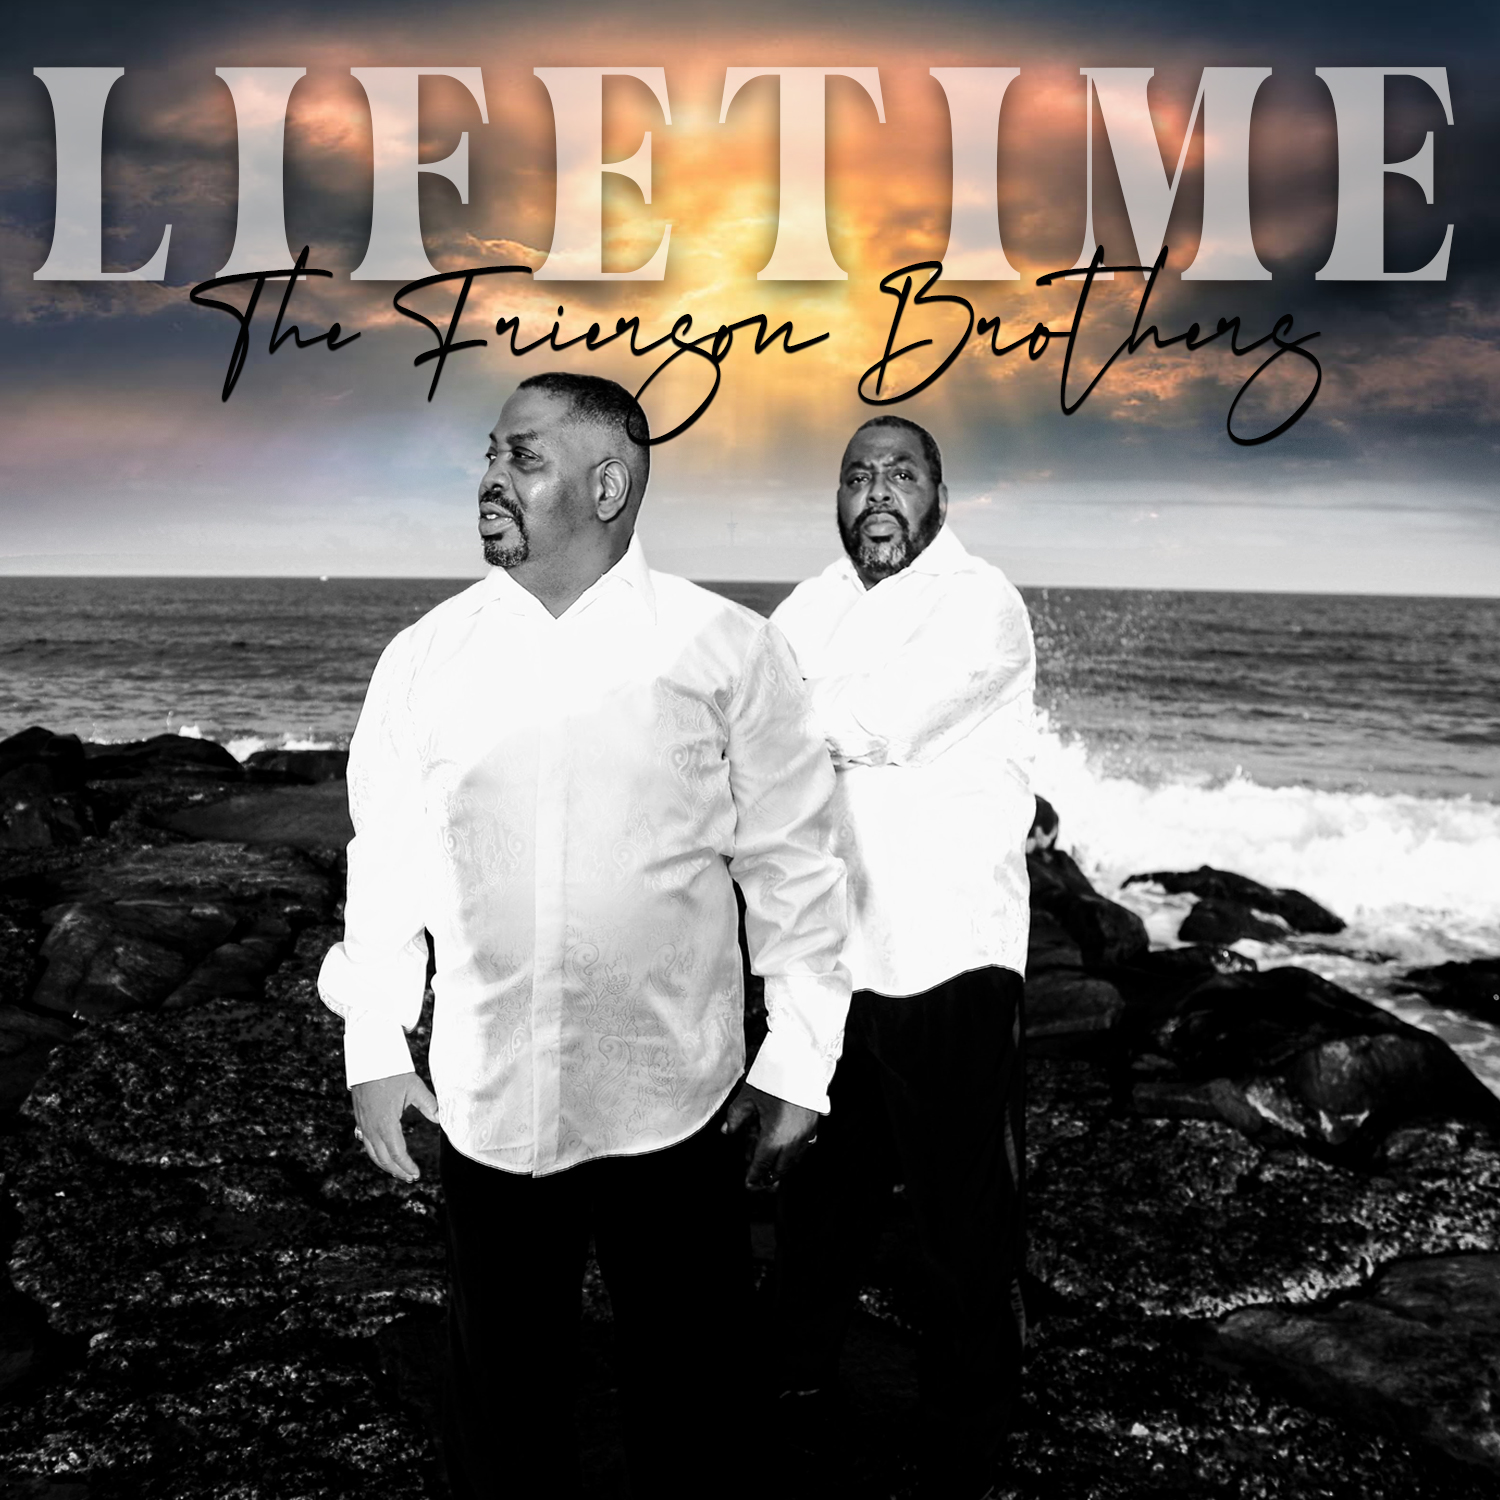 Art for LIFETIME by THE FRIERSON BROTHERS